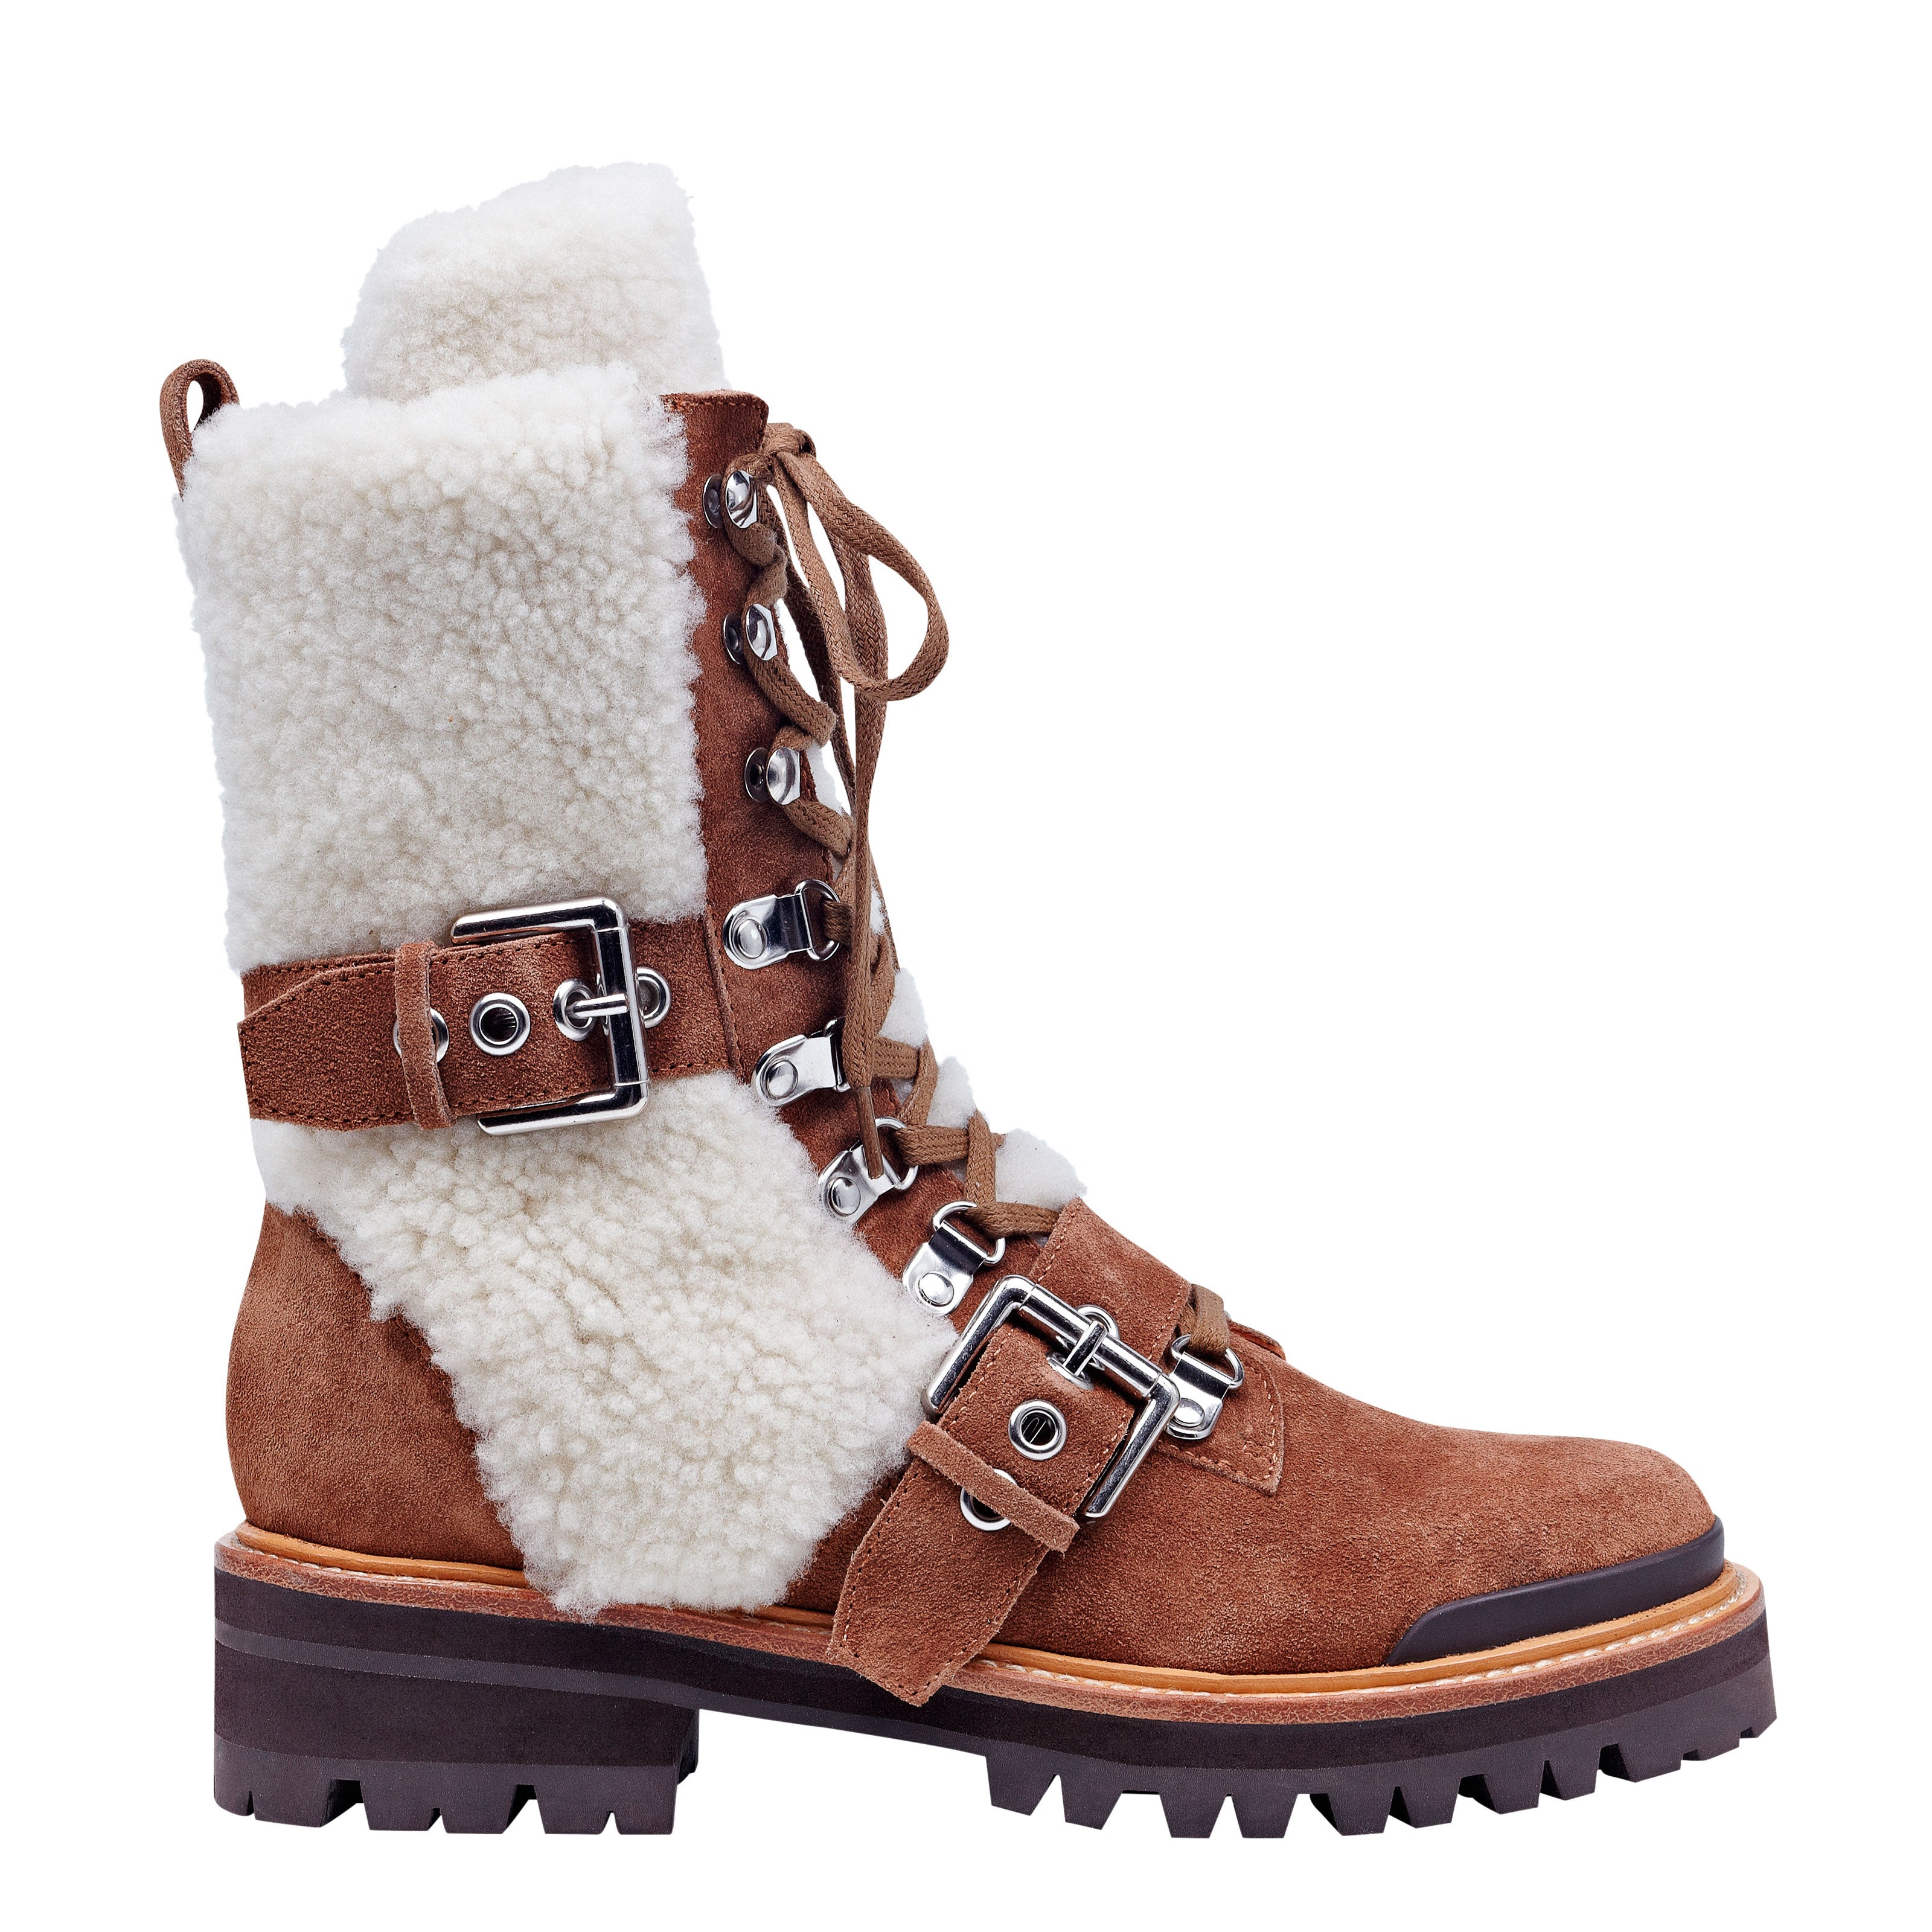 7 Winter Boots That Are Surprisingly Super Stylish
